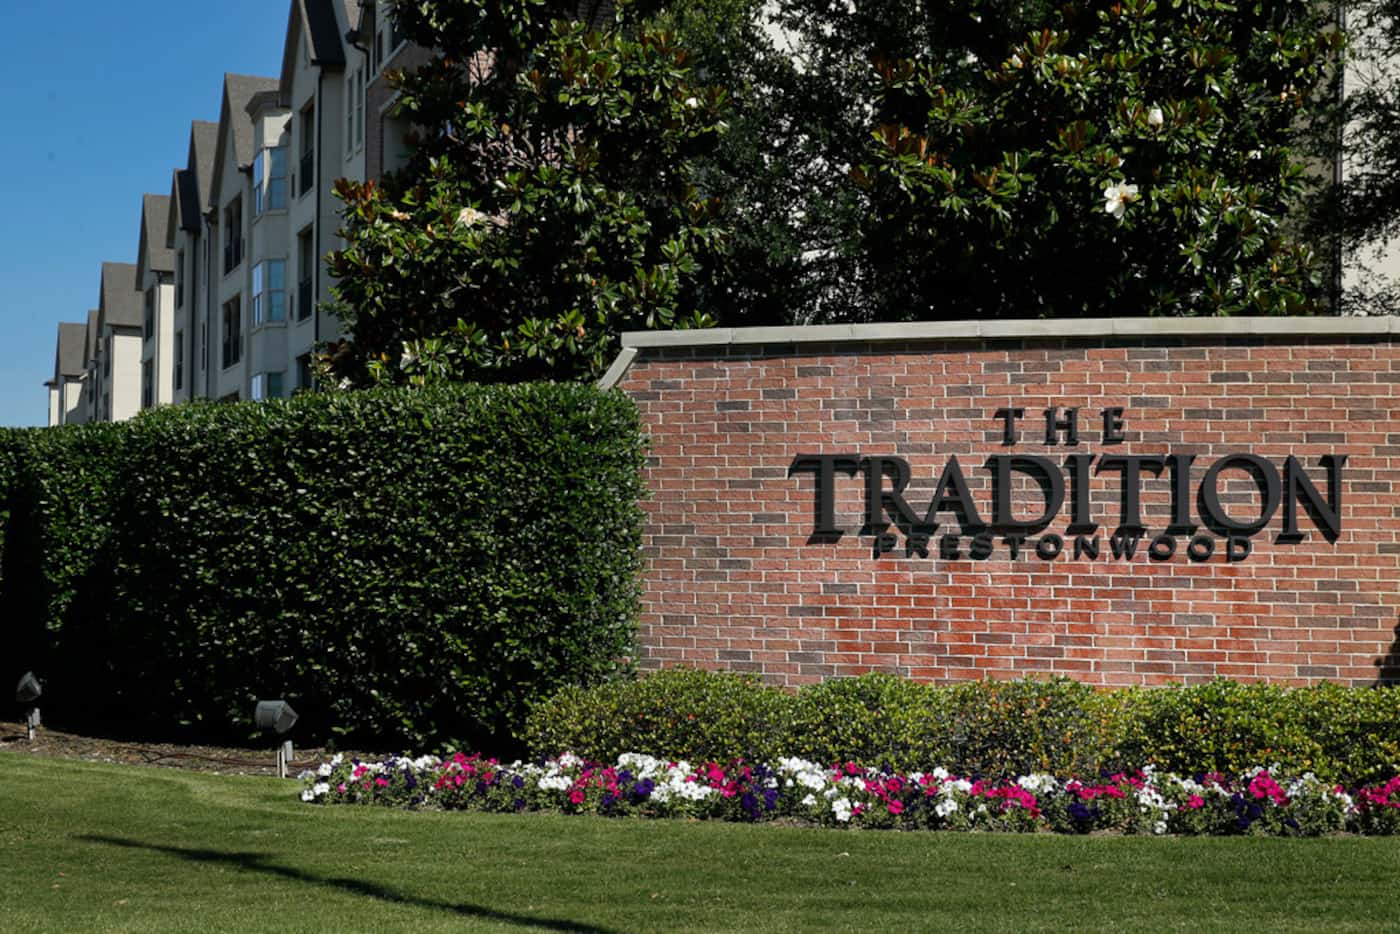 Two elderly women were killed in their apartments at the Tradition - Prestonwood senior...